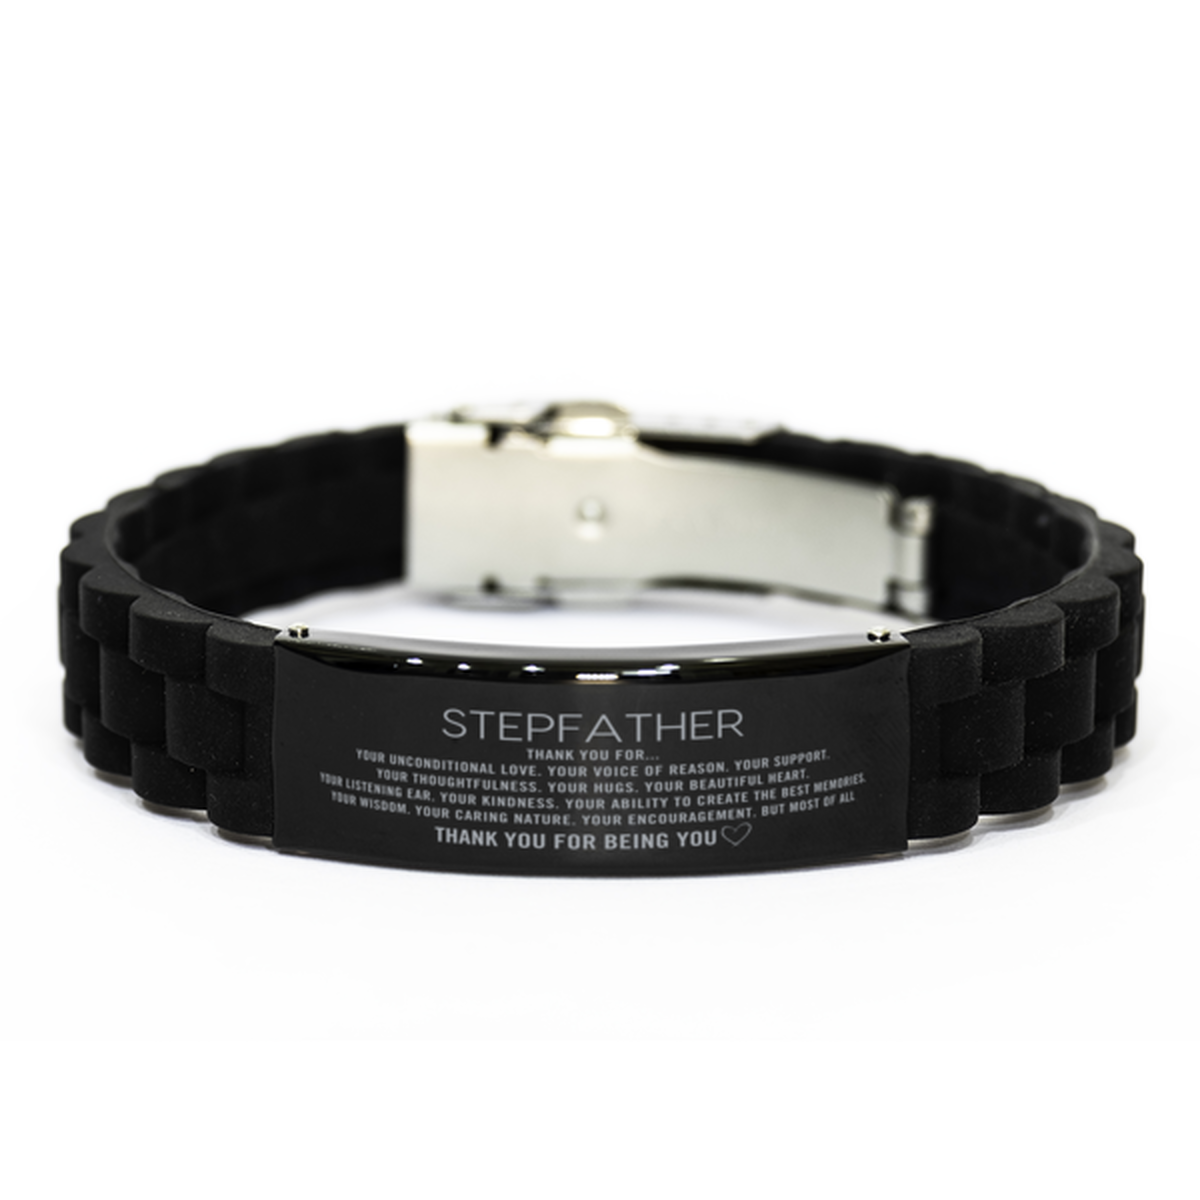 Stepfather Black Glidelock Clasp Bracelet Custom, Engraved Gifts For Stepfather Christmas Graduation Birthday Gifts for Men Women Stepfather Thank you for Your unconditional love